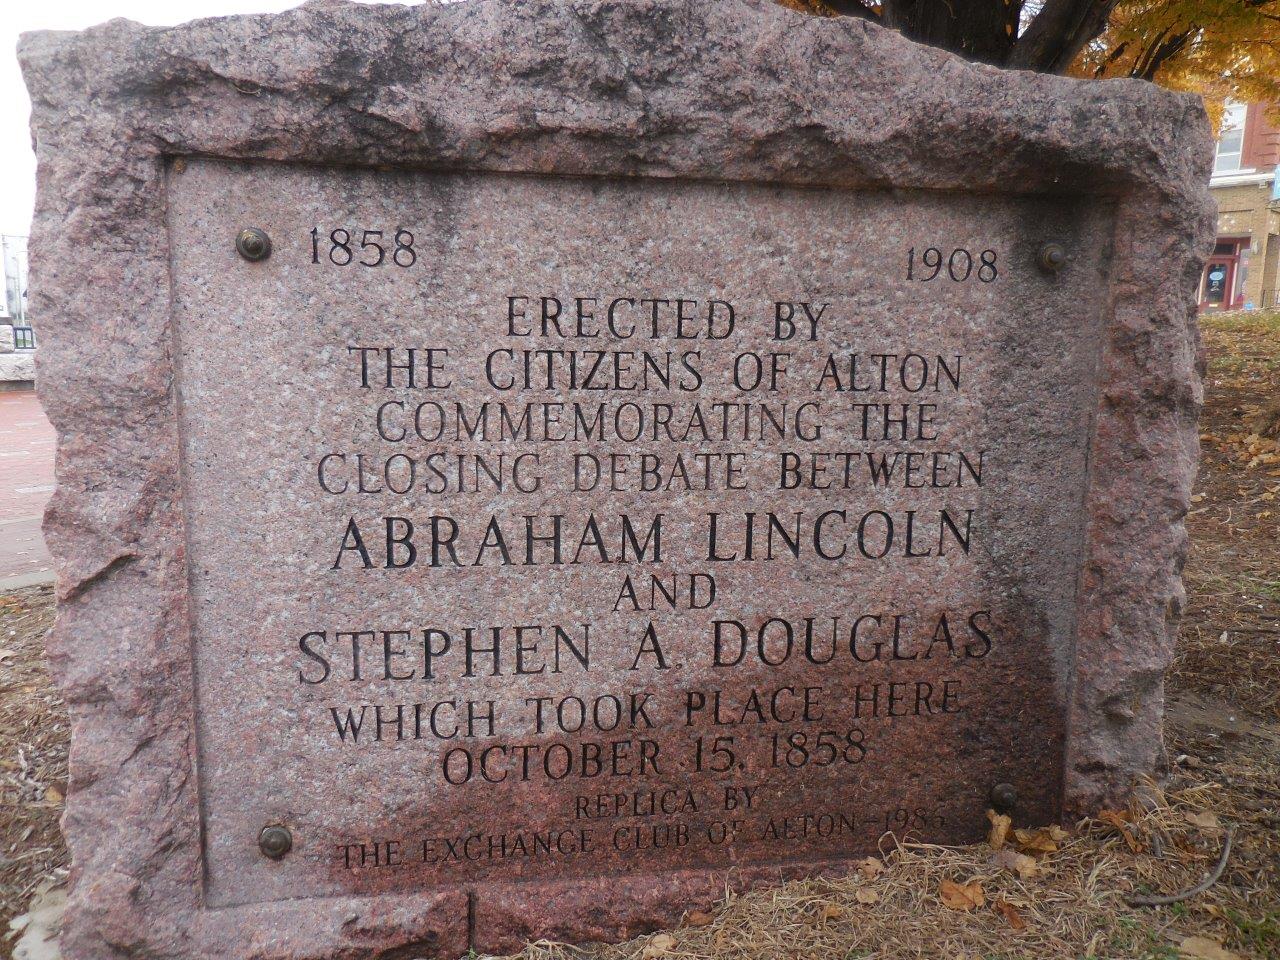 Historical marker at site of Lincoln-Douglas debate